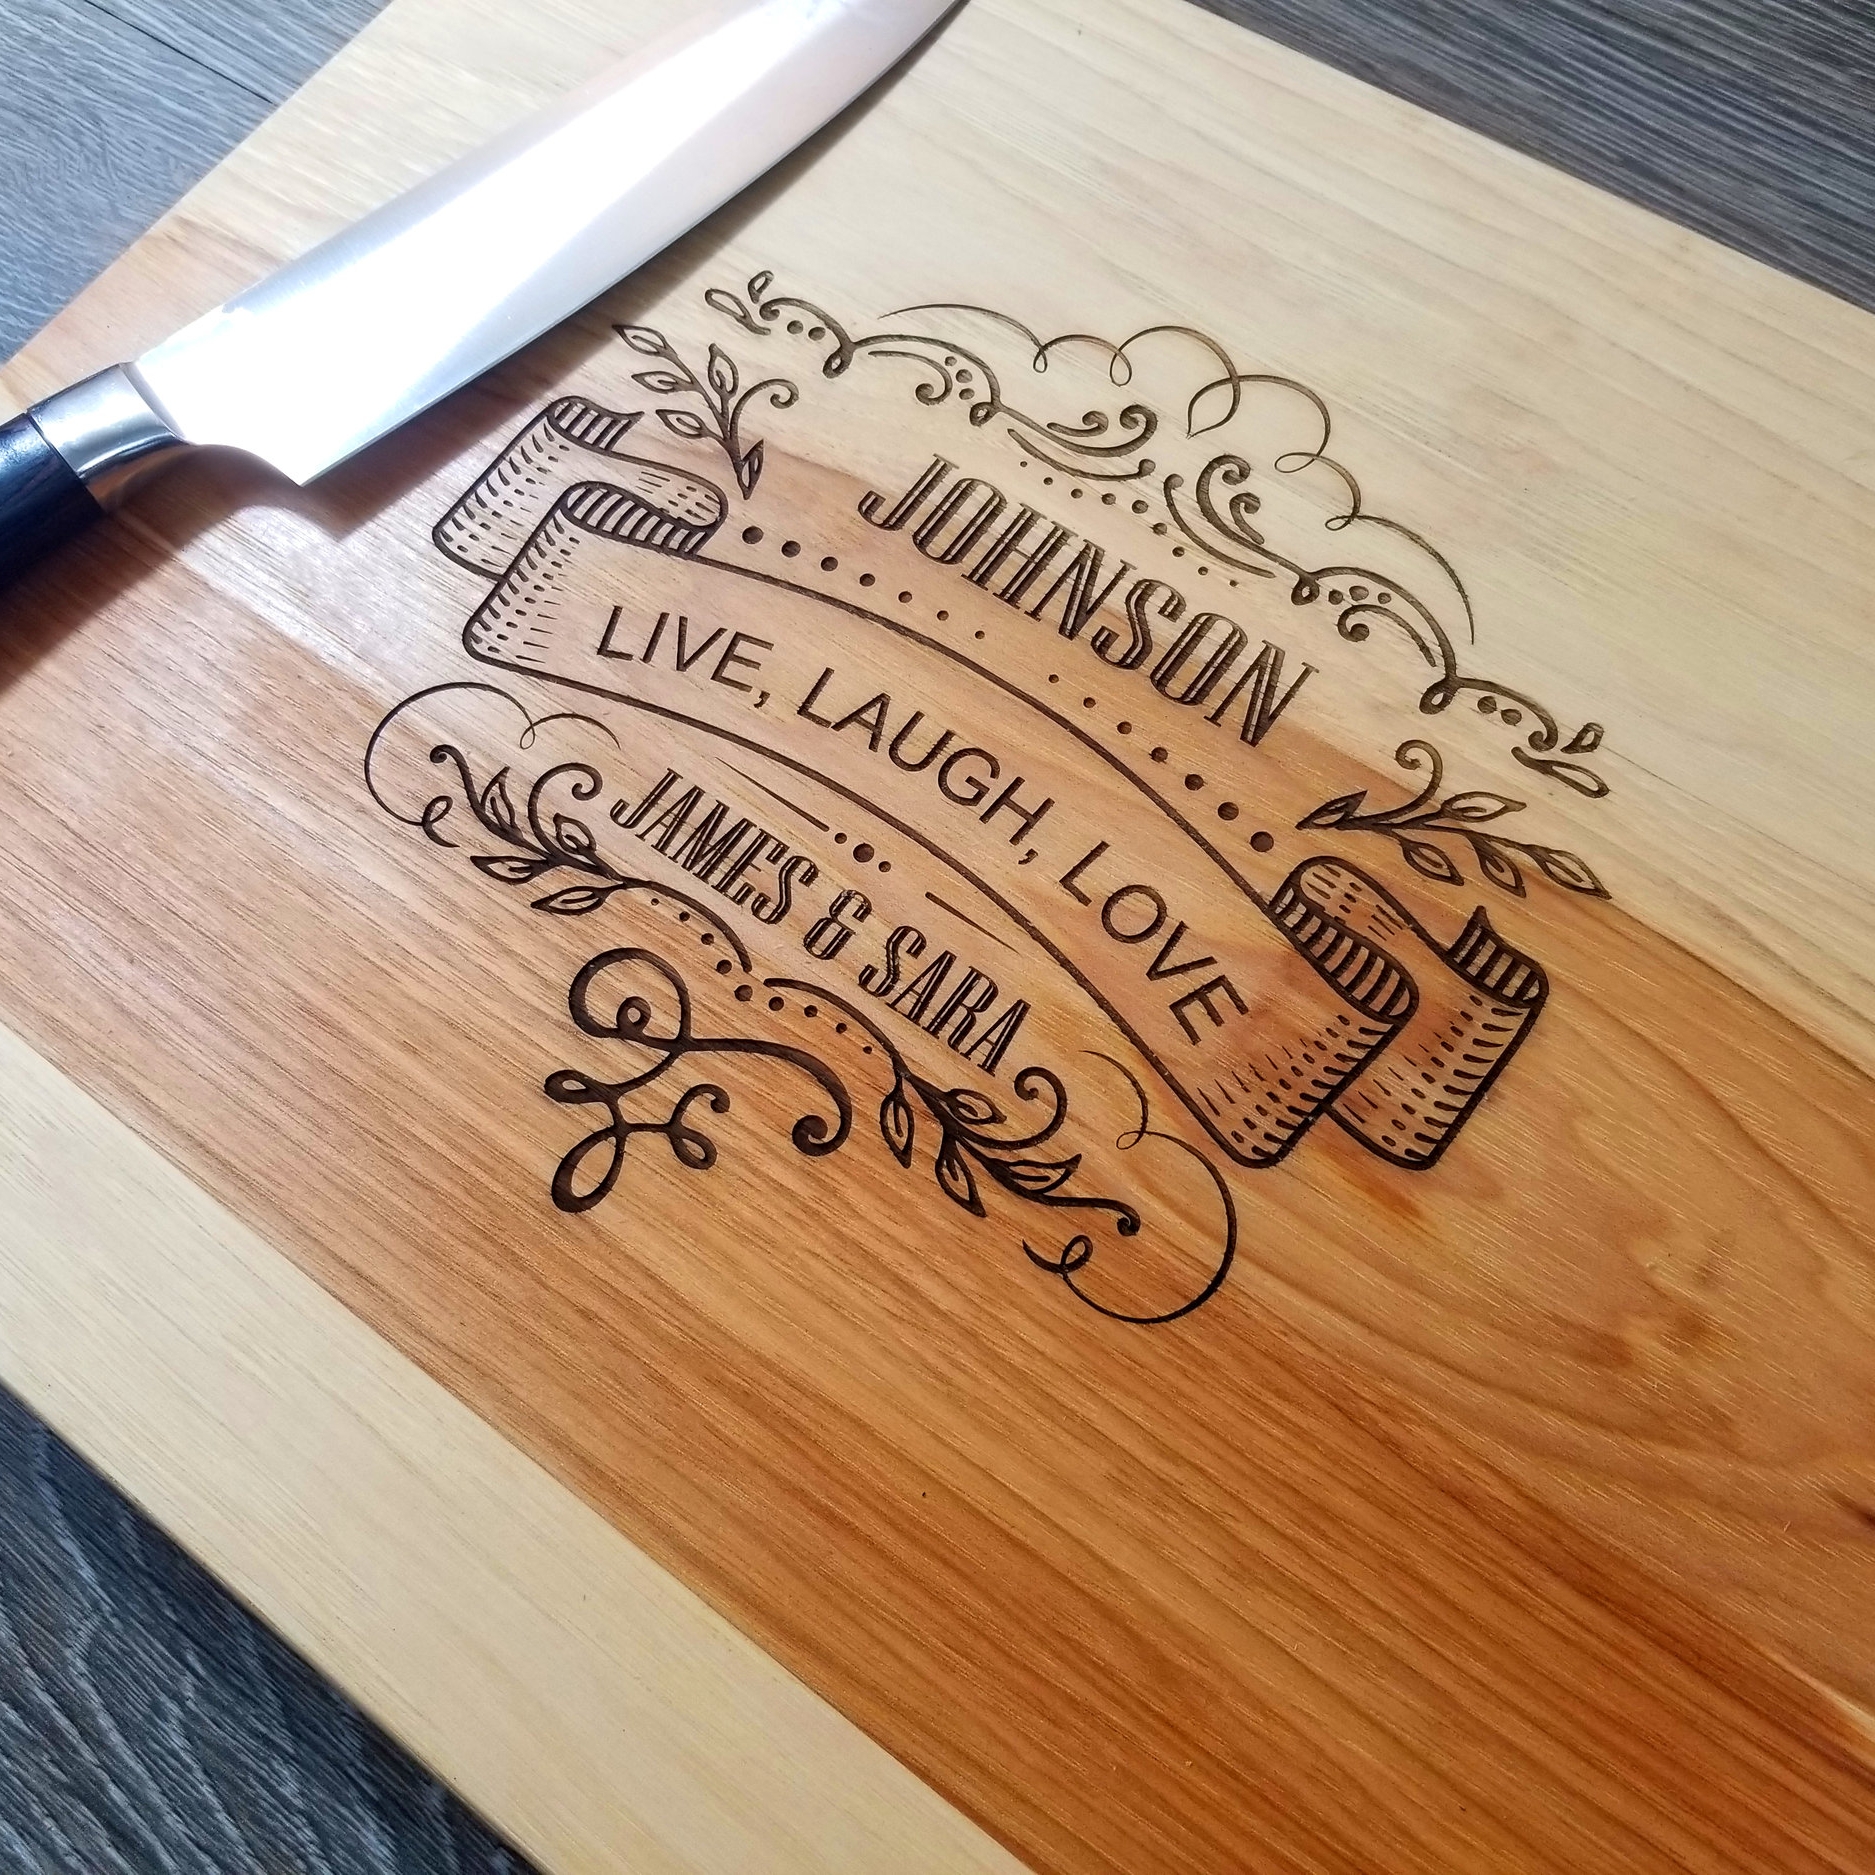 Personalized cutting board by Vinyl This ! in Katy, TX - Alignable